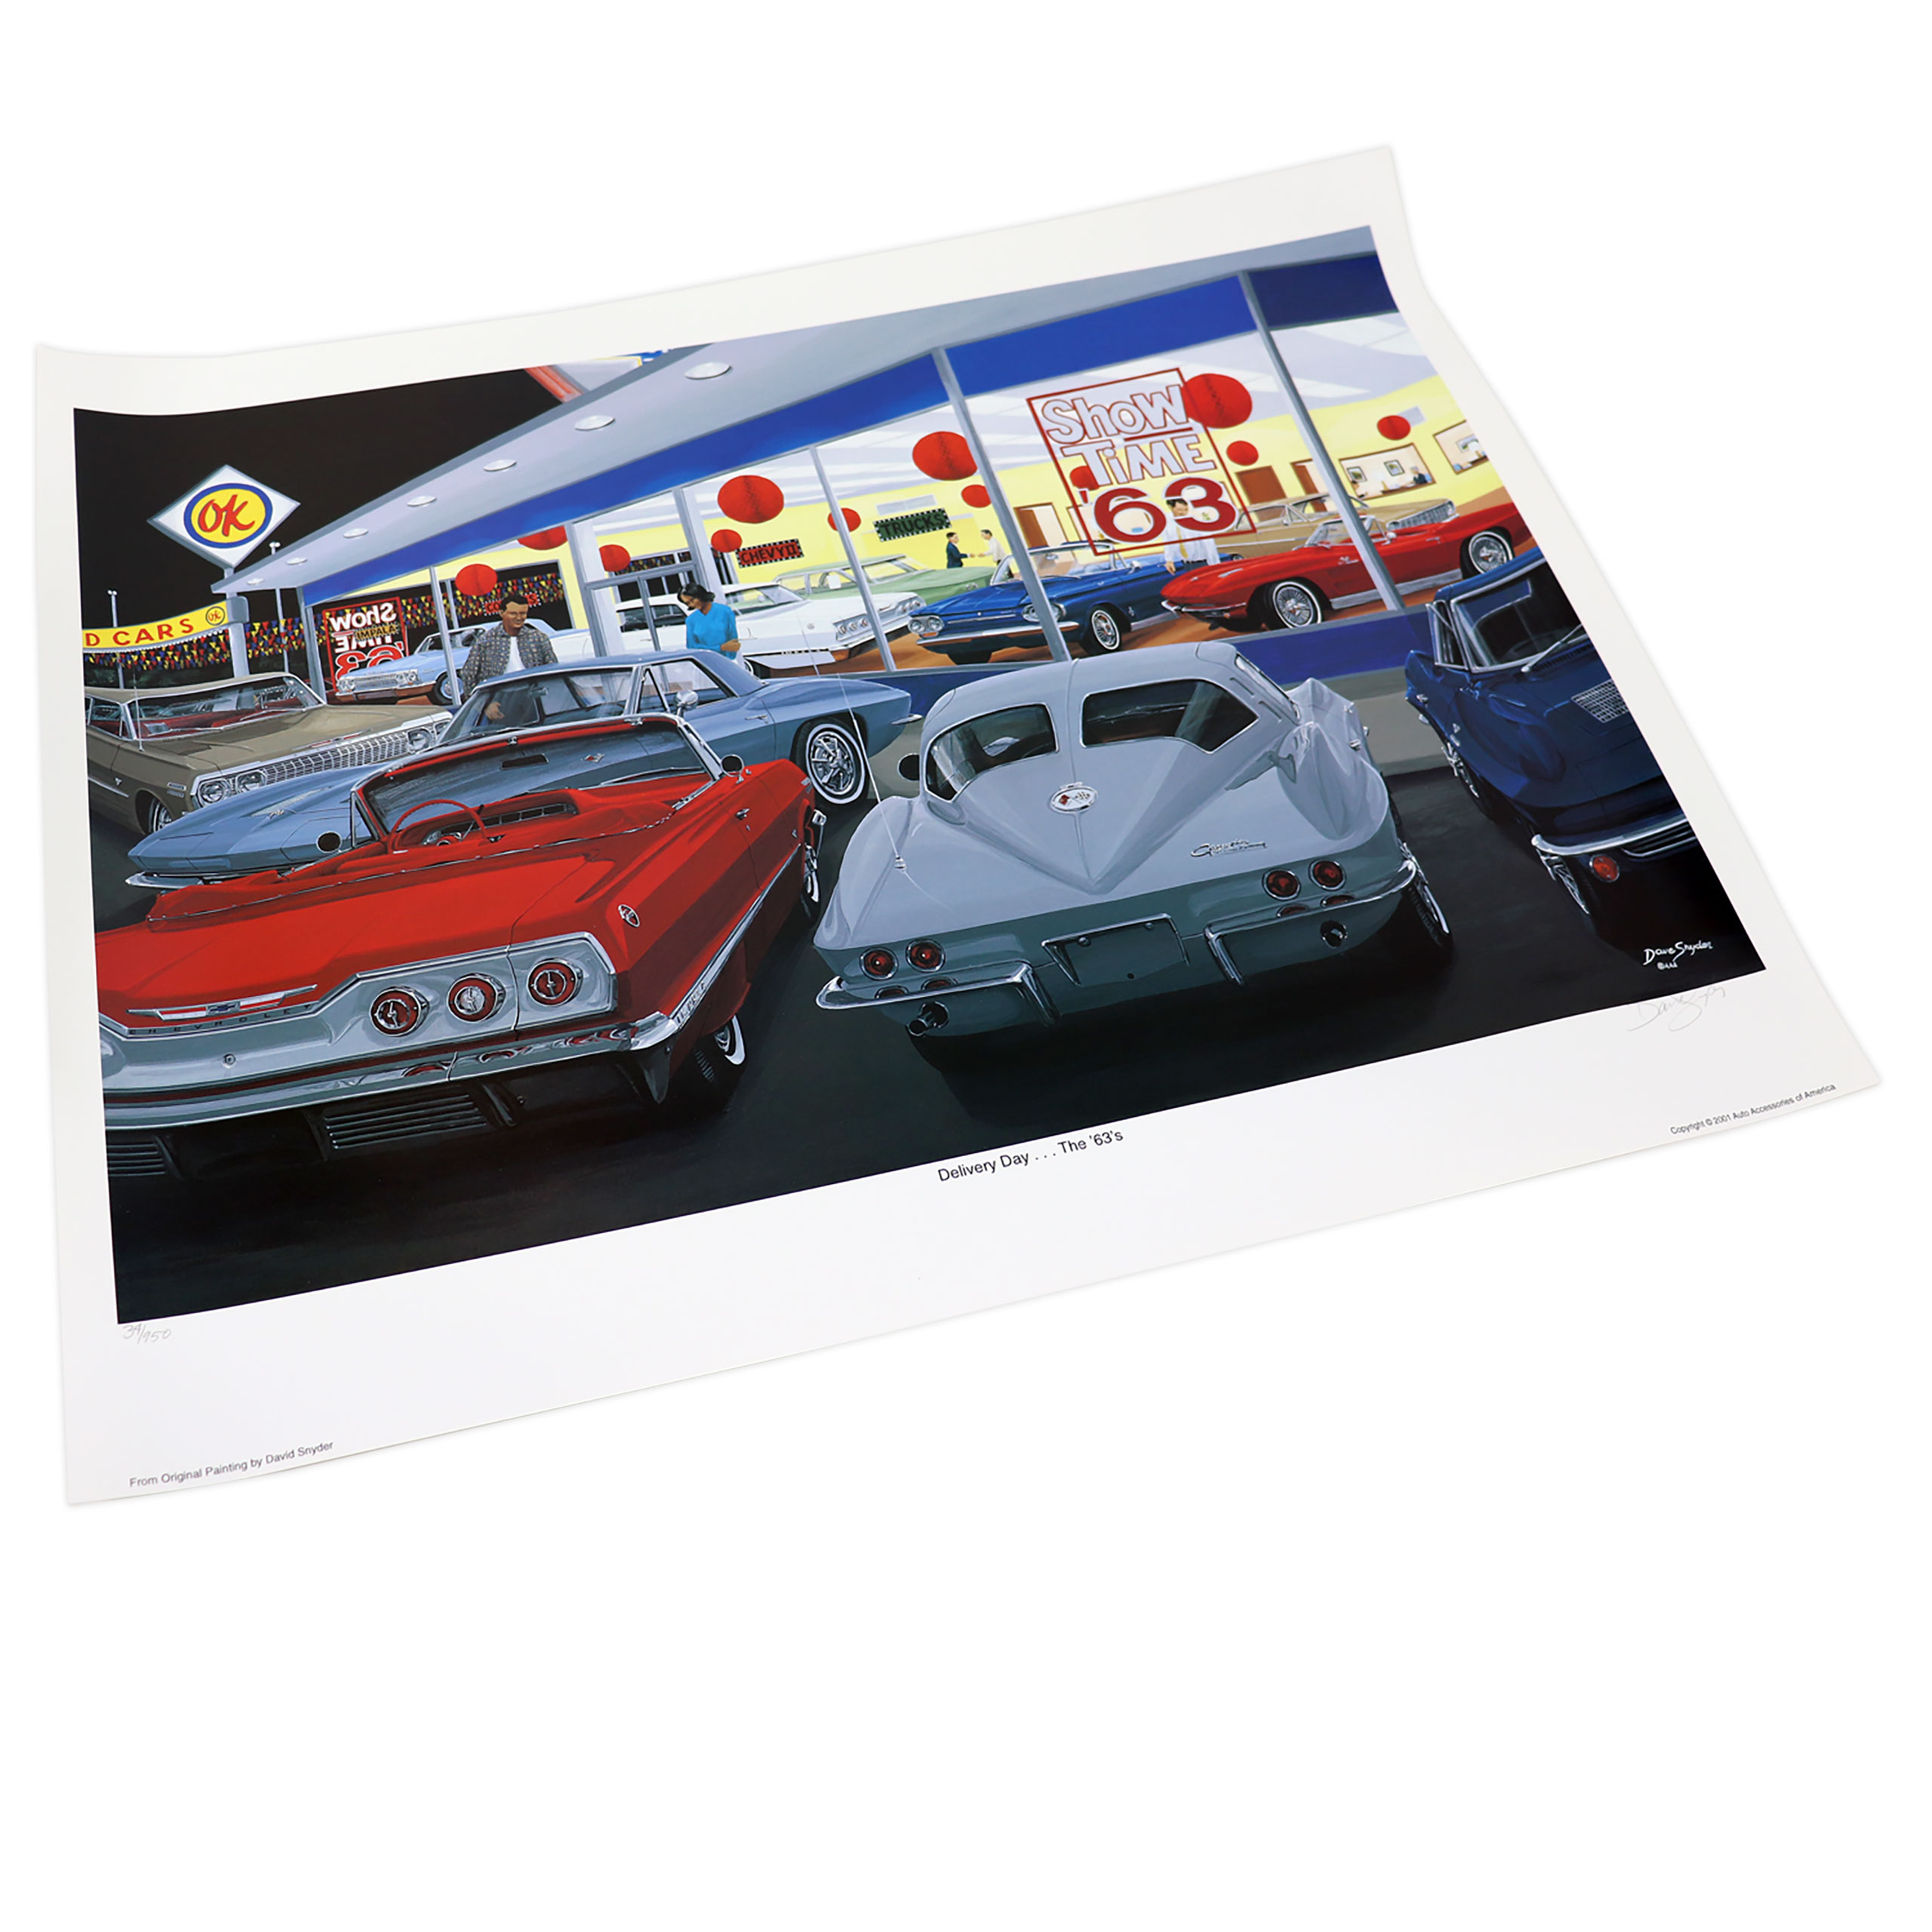 C2 1963 Chevrolet Corvette Delivery Day: The 63's Limited Edition Print - David Snyder